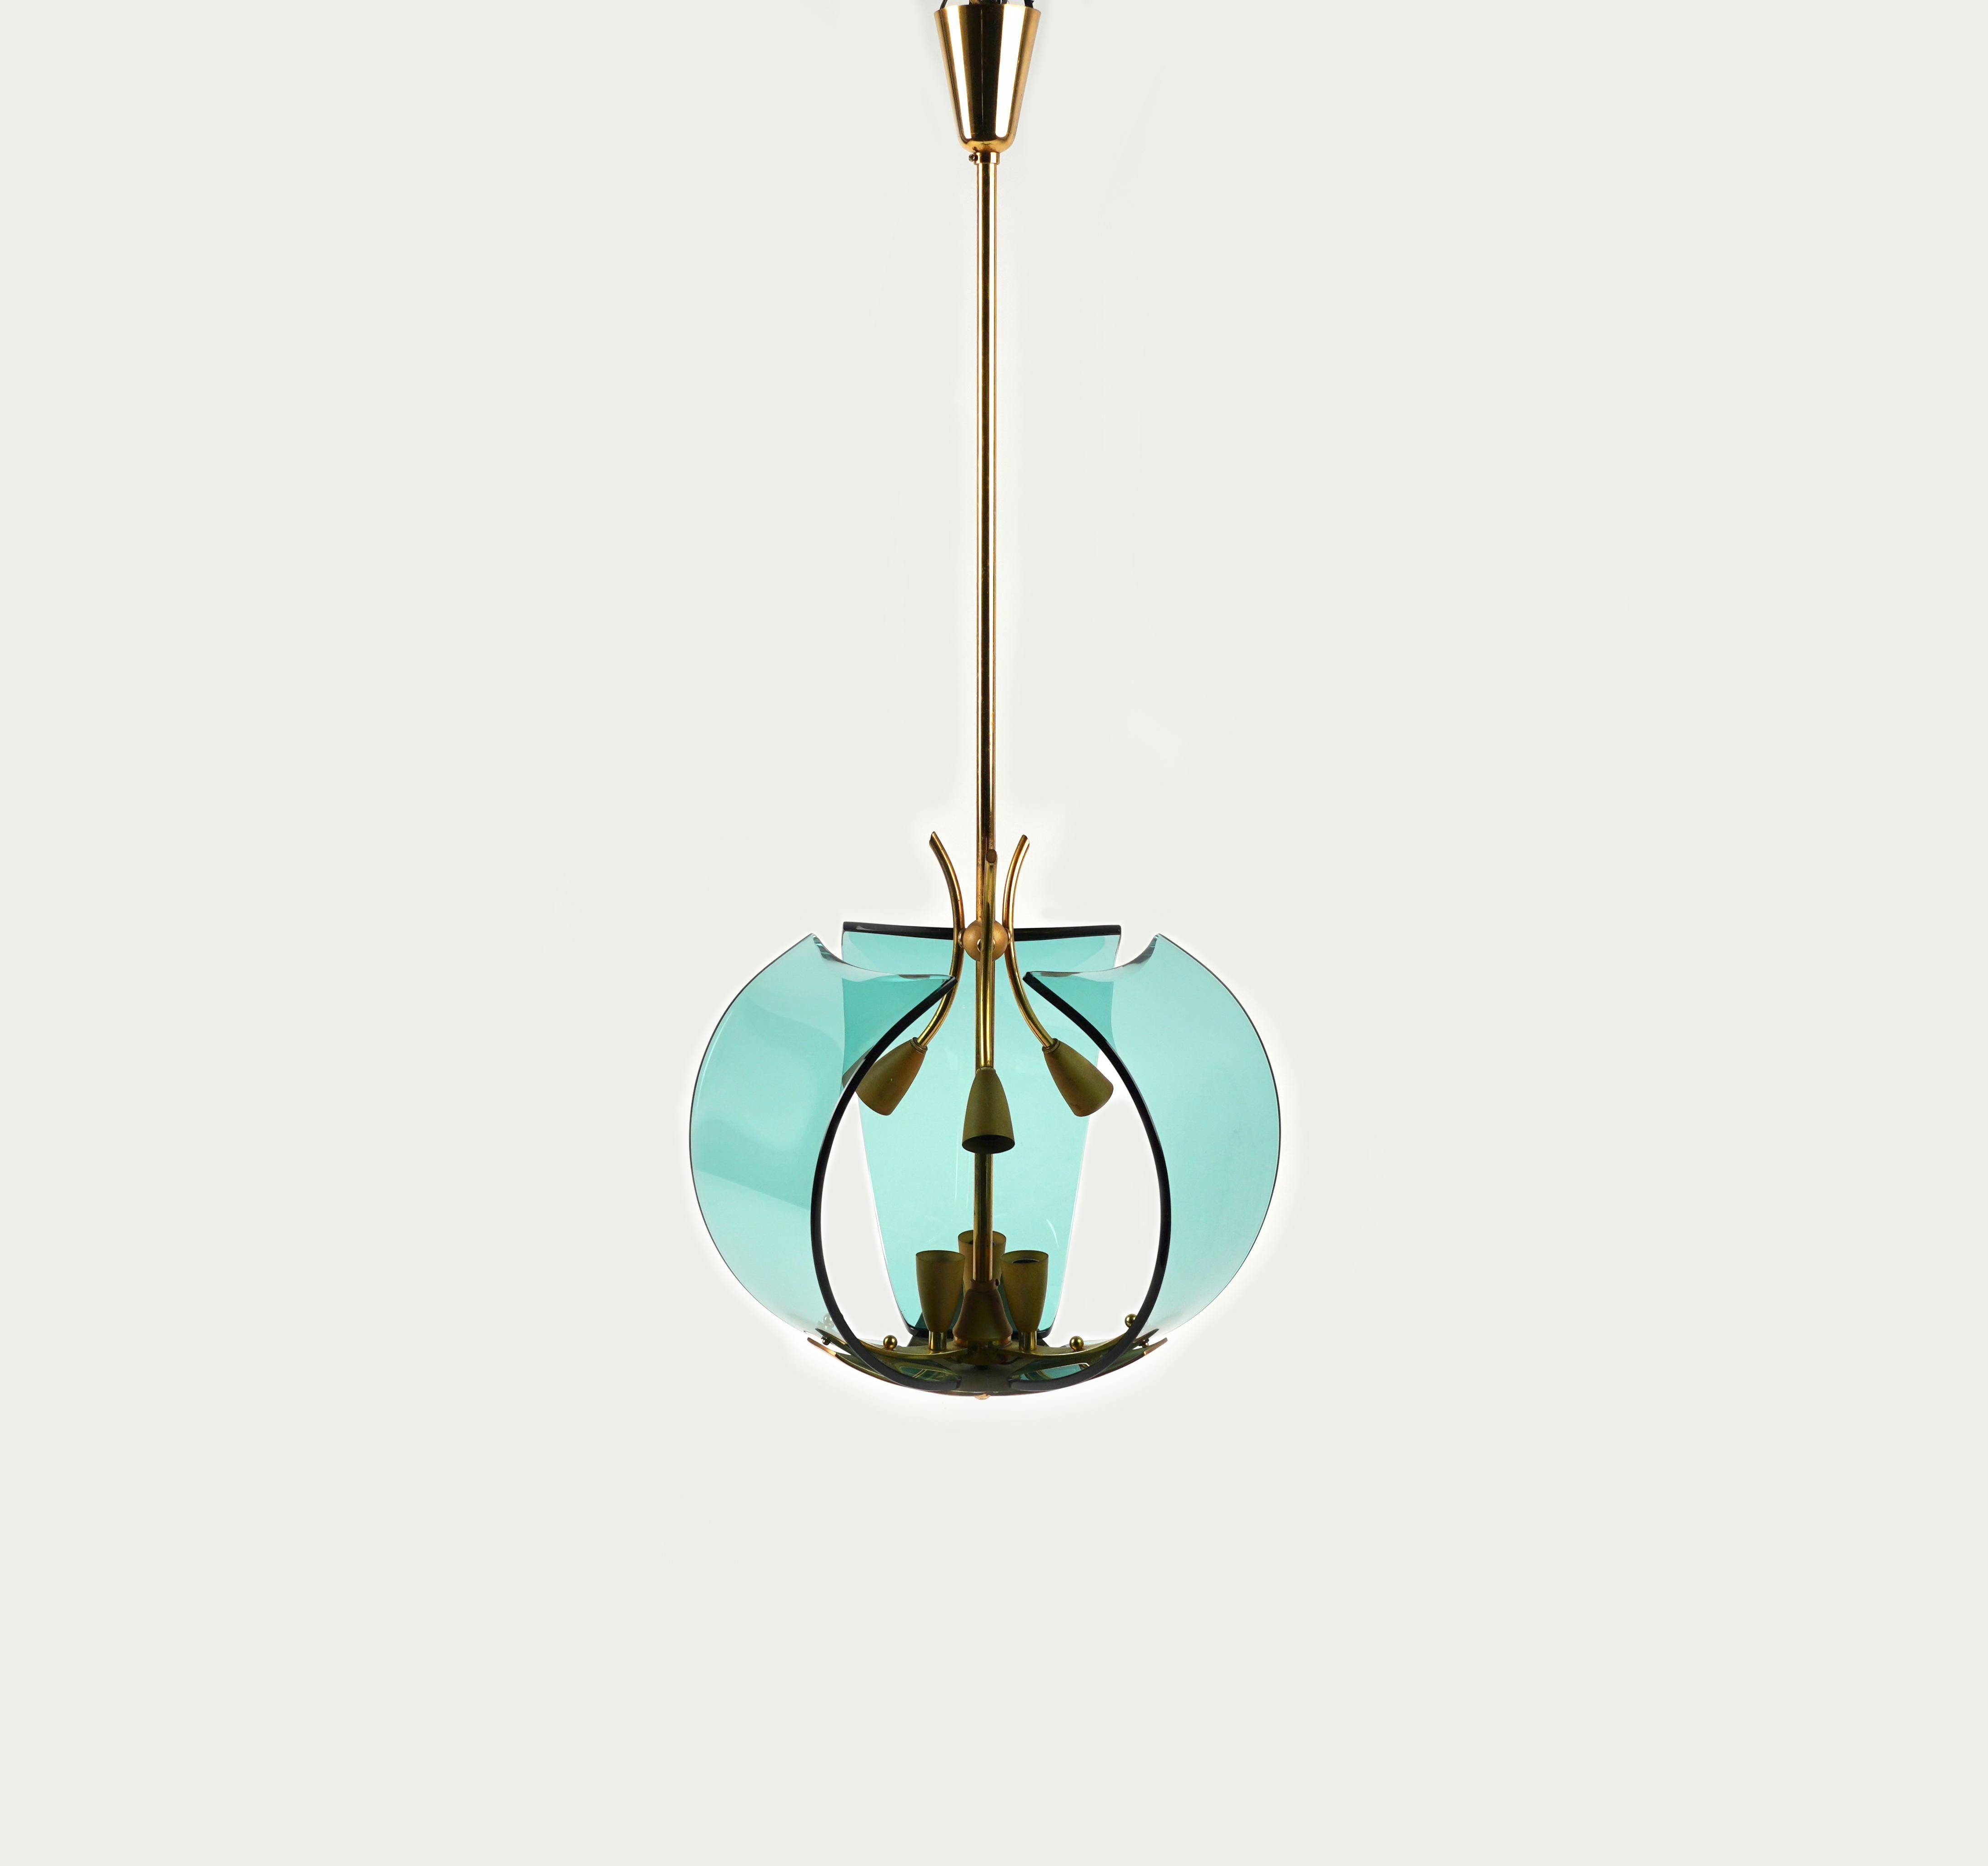 Italian Midcentury Chandelier in Brass and Glass by Fontana Arte, Italy, 1950s For Sale